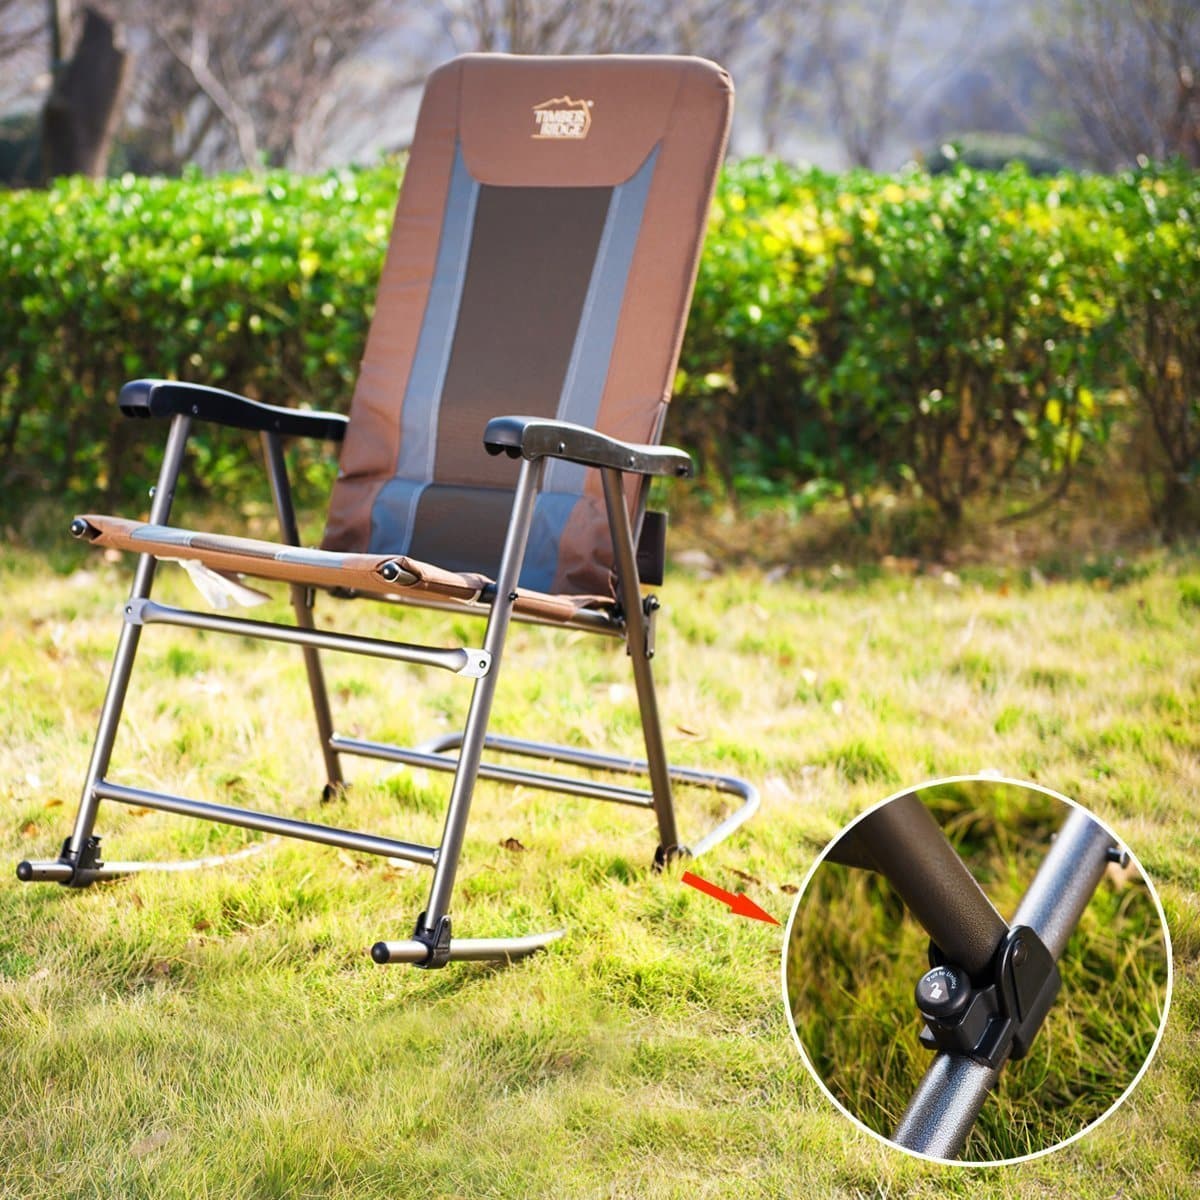 Top 10 Best Folding Chairs Reviews in 2022 - Top Best Products